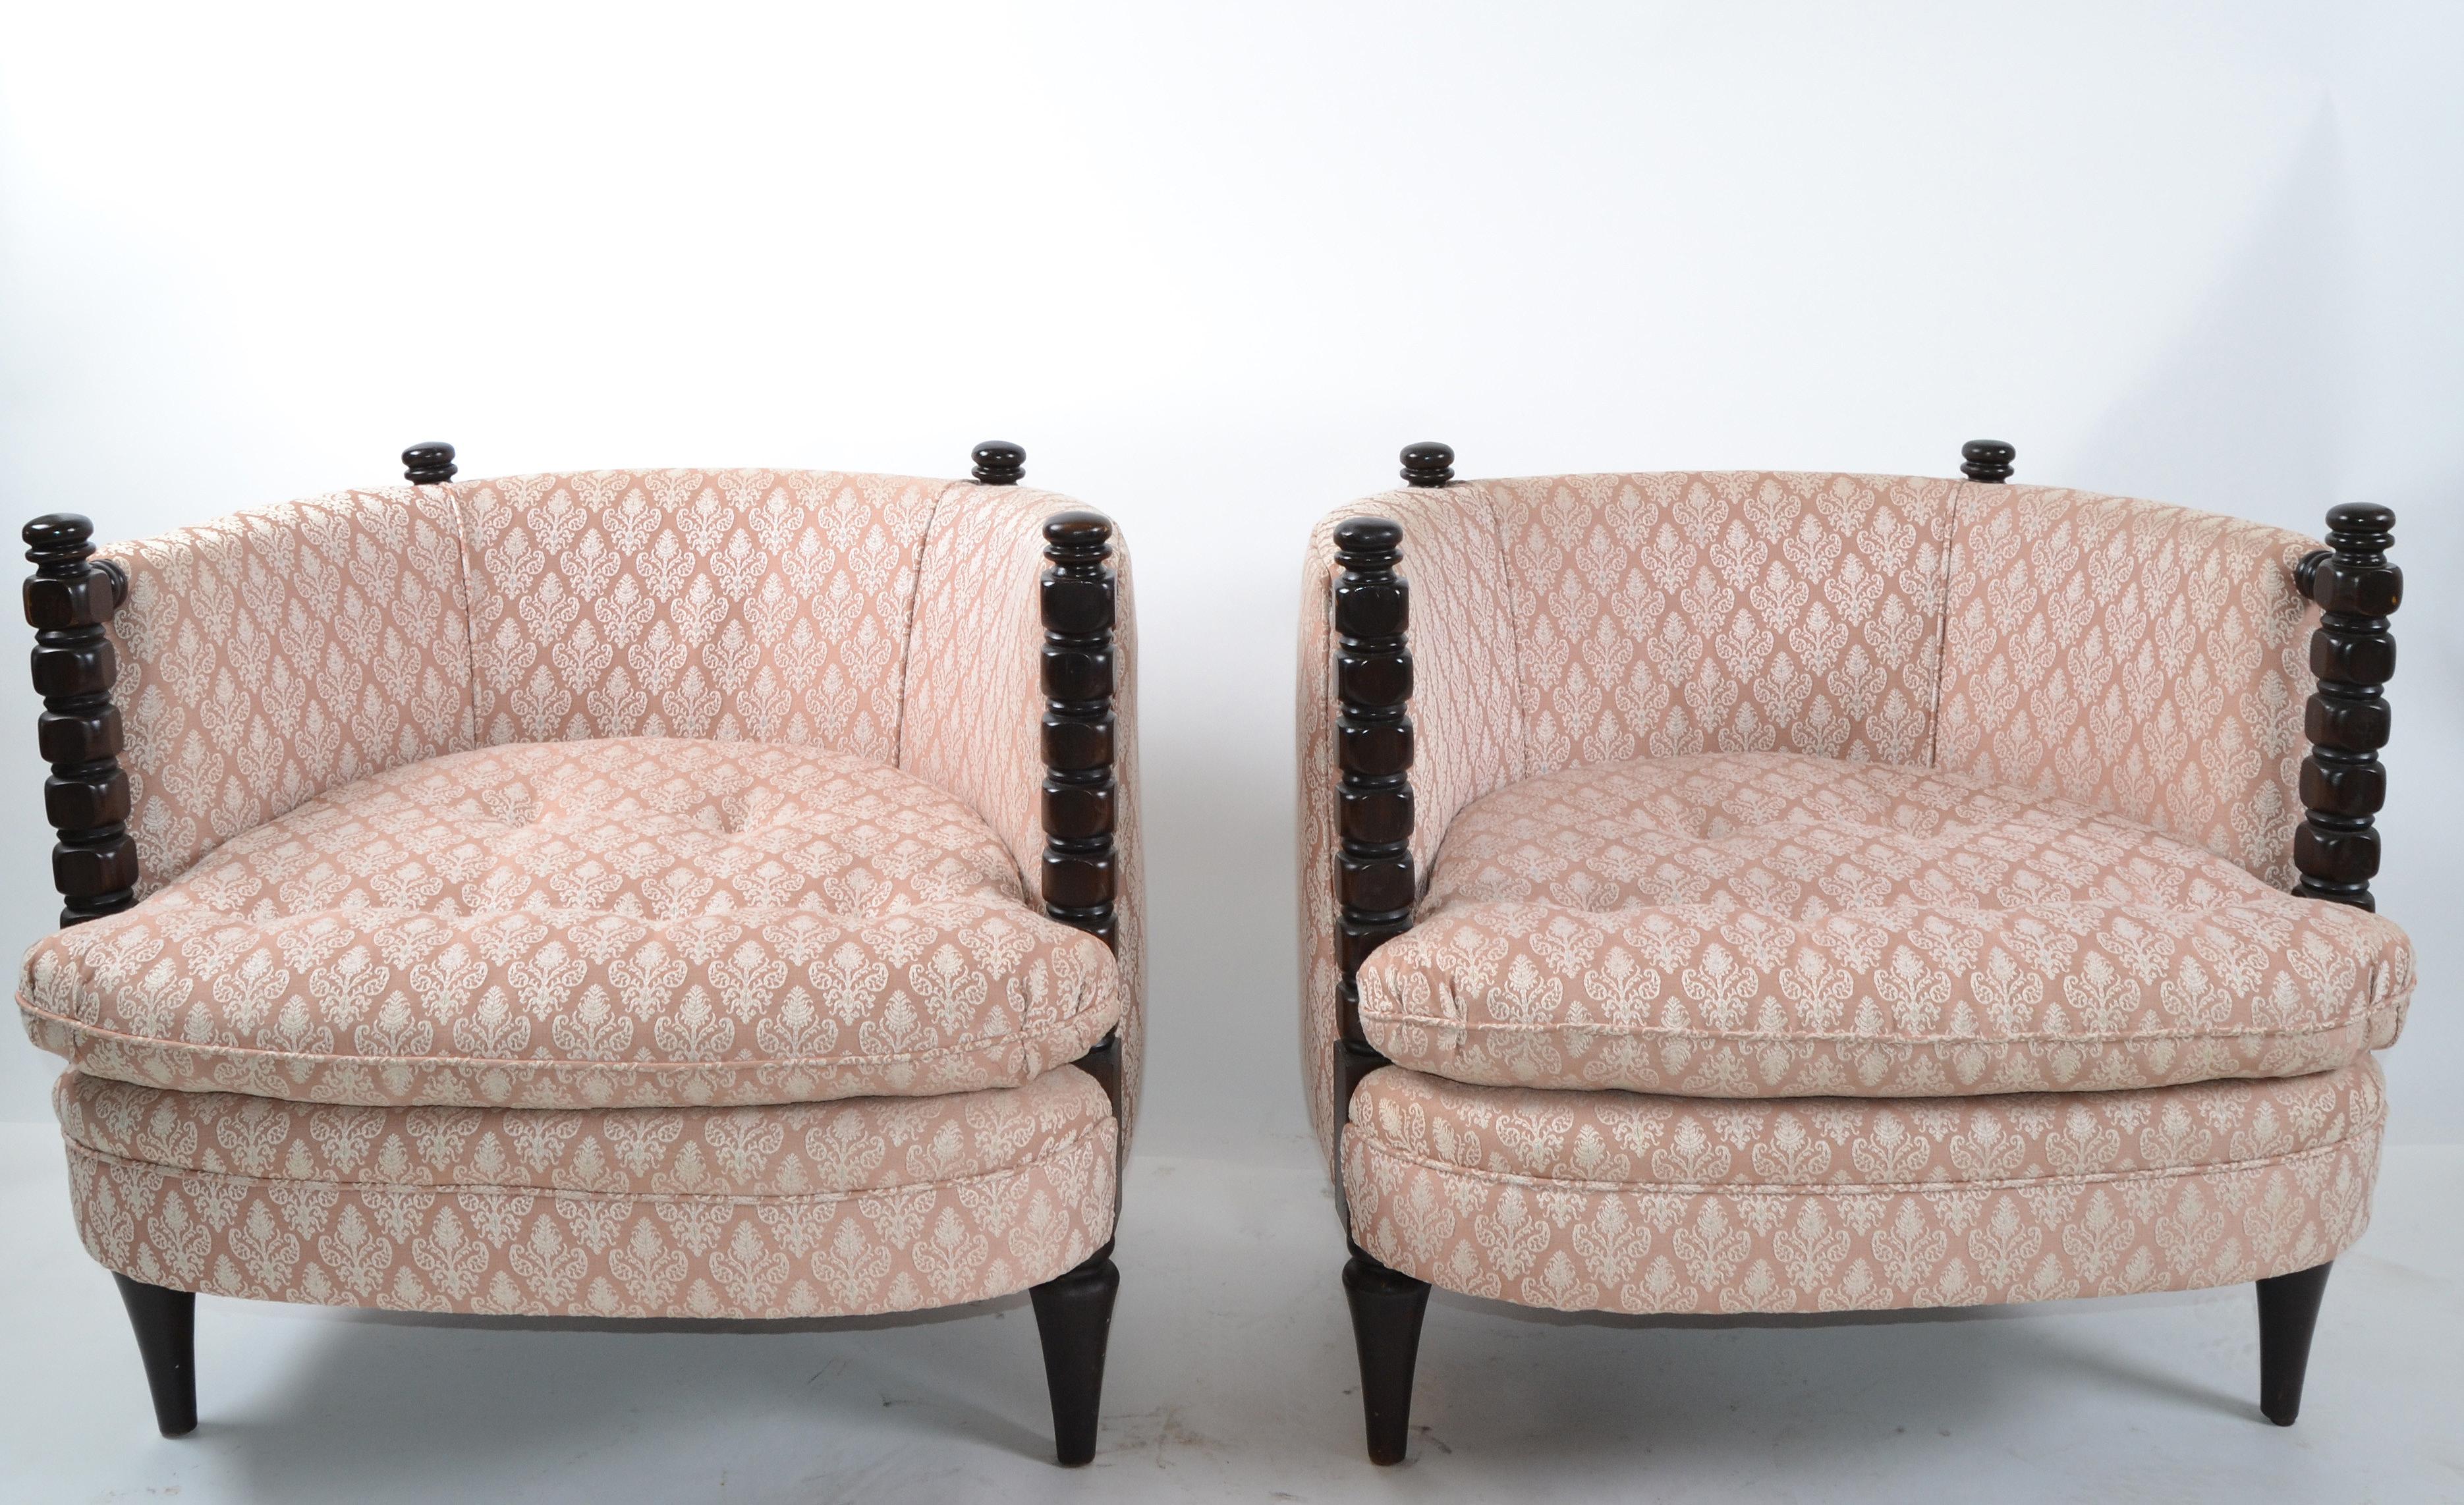 Neoclassical 1950s Turned Wood and Tufted Fabric Upholstery Barrel Chairs, Club Chairs, Pair